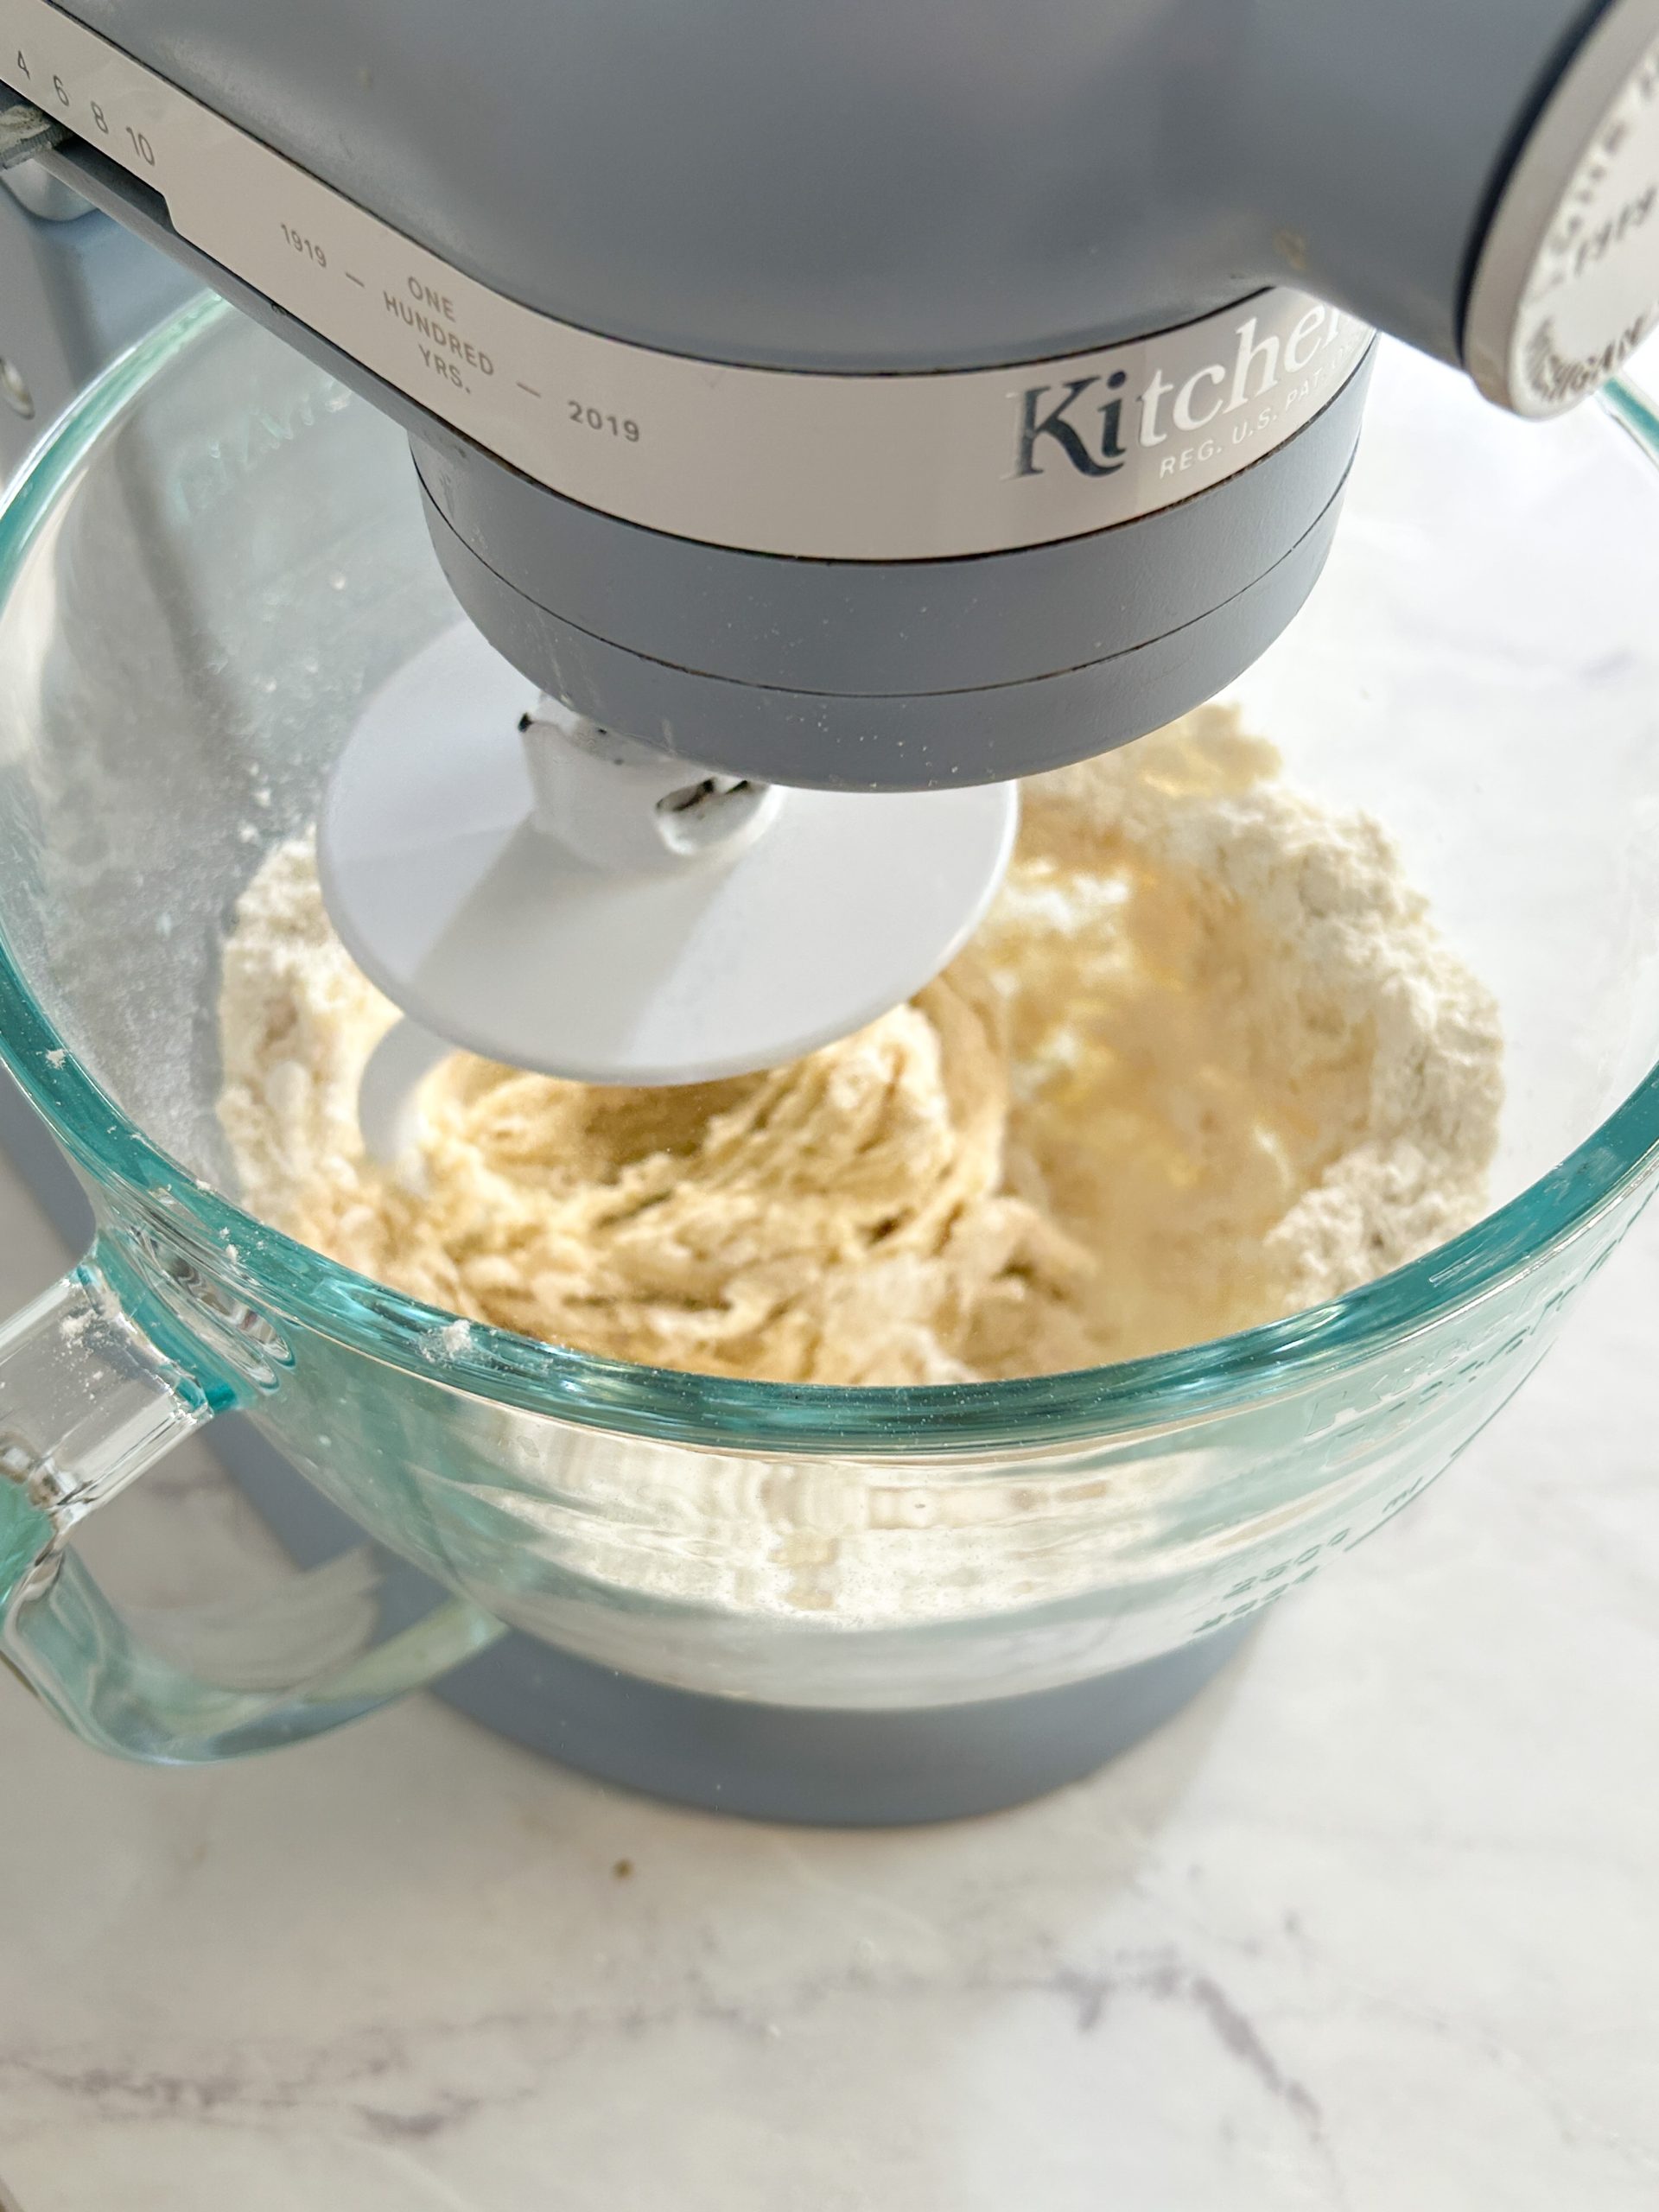 kitchen aid mixer making bread dough with dough hook attachment